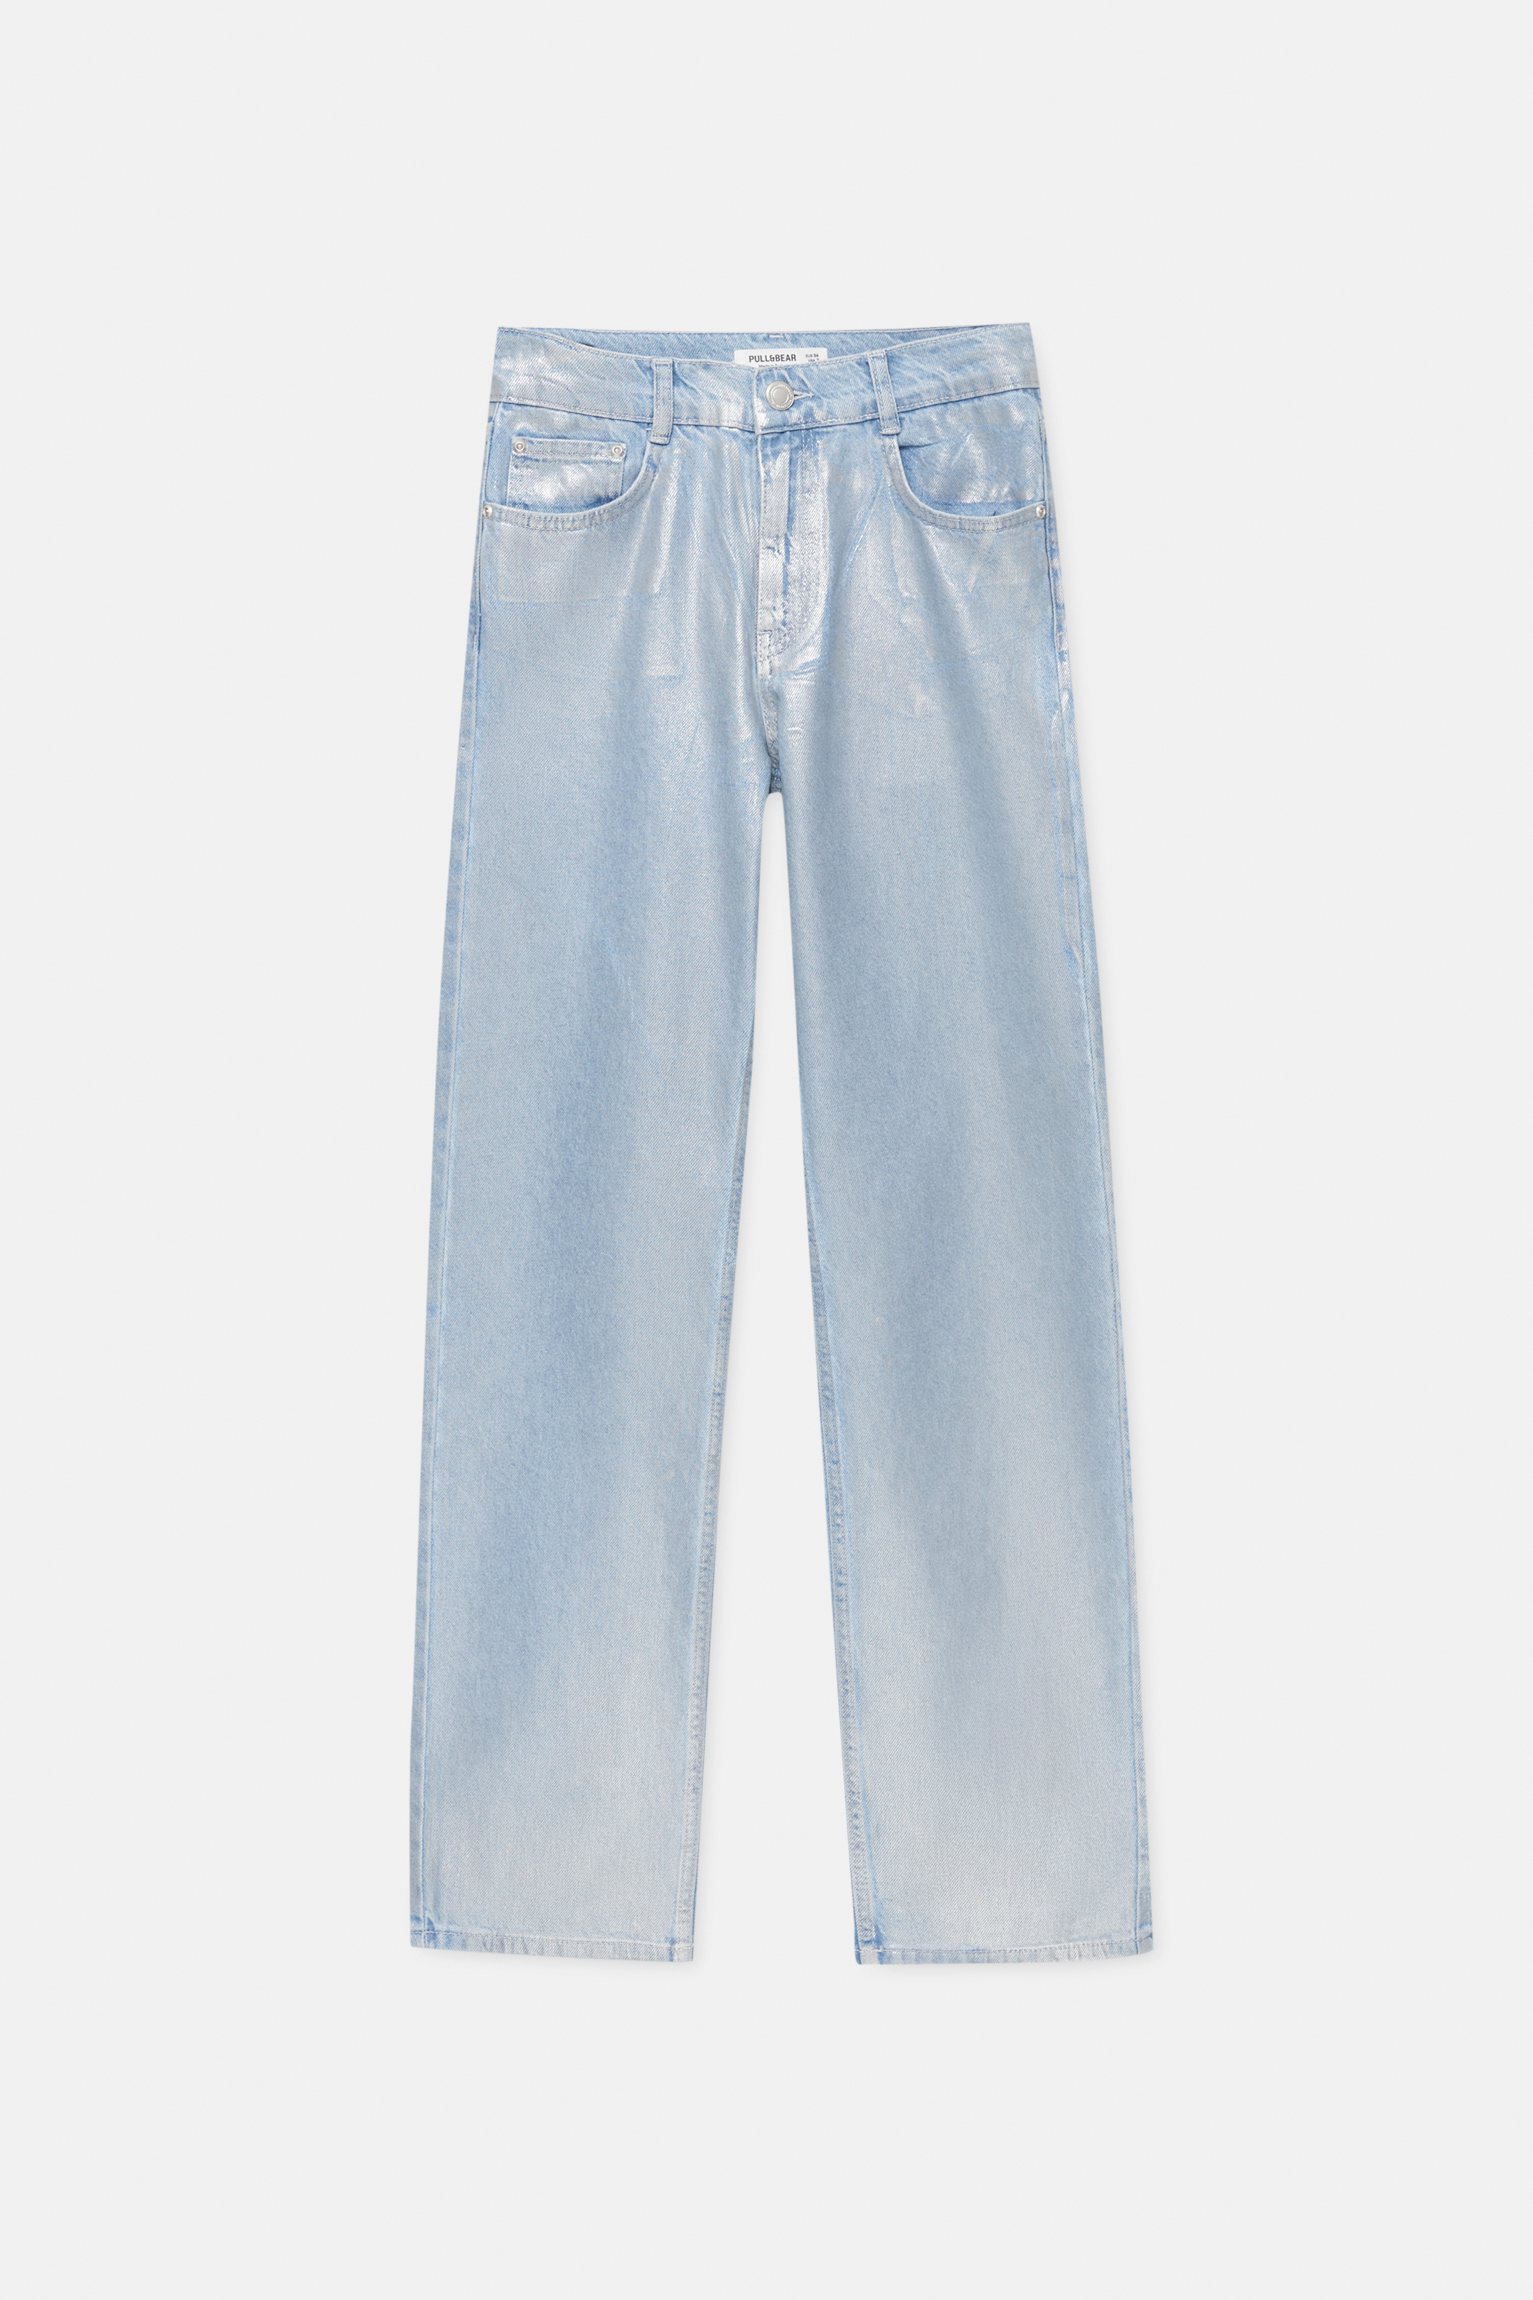 Pull & Bear balloon fit jeans in blue | ASOS